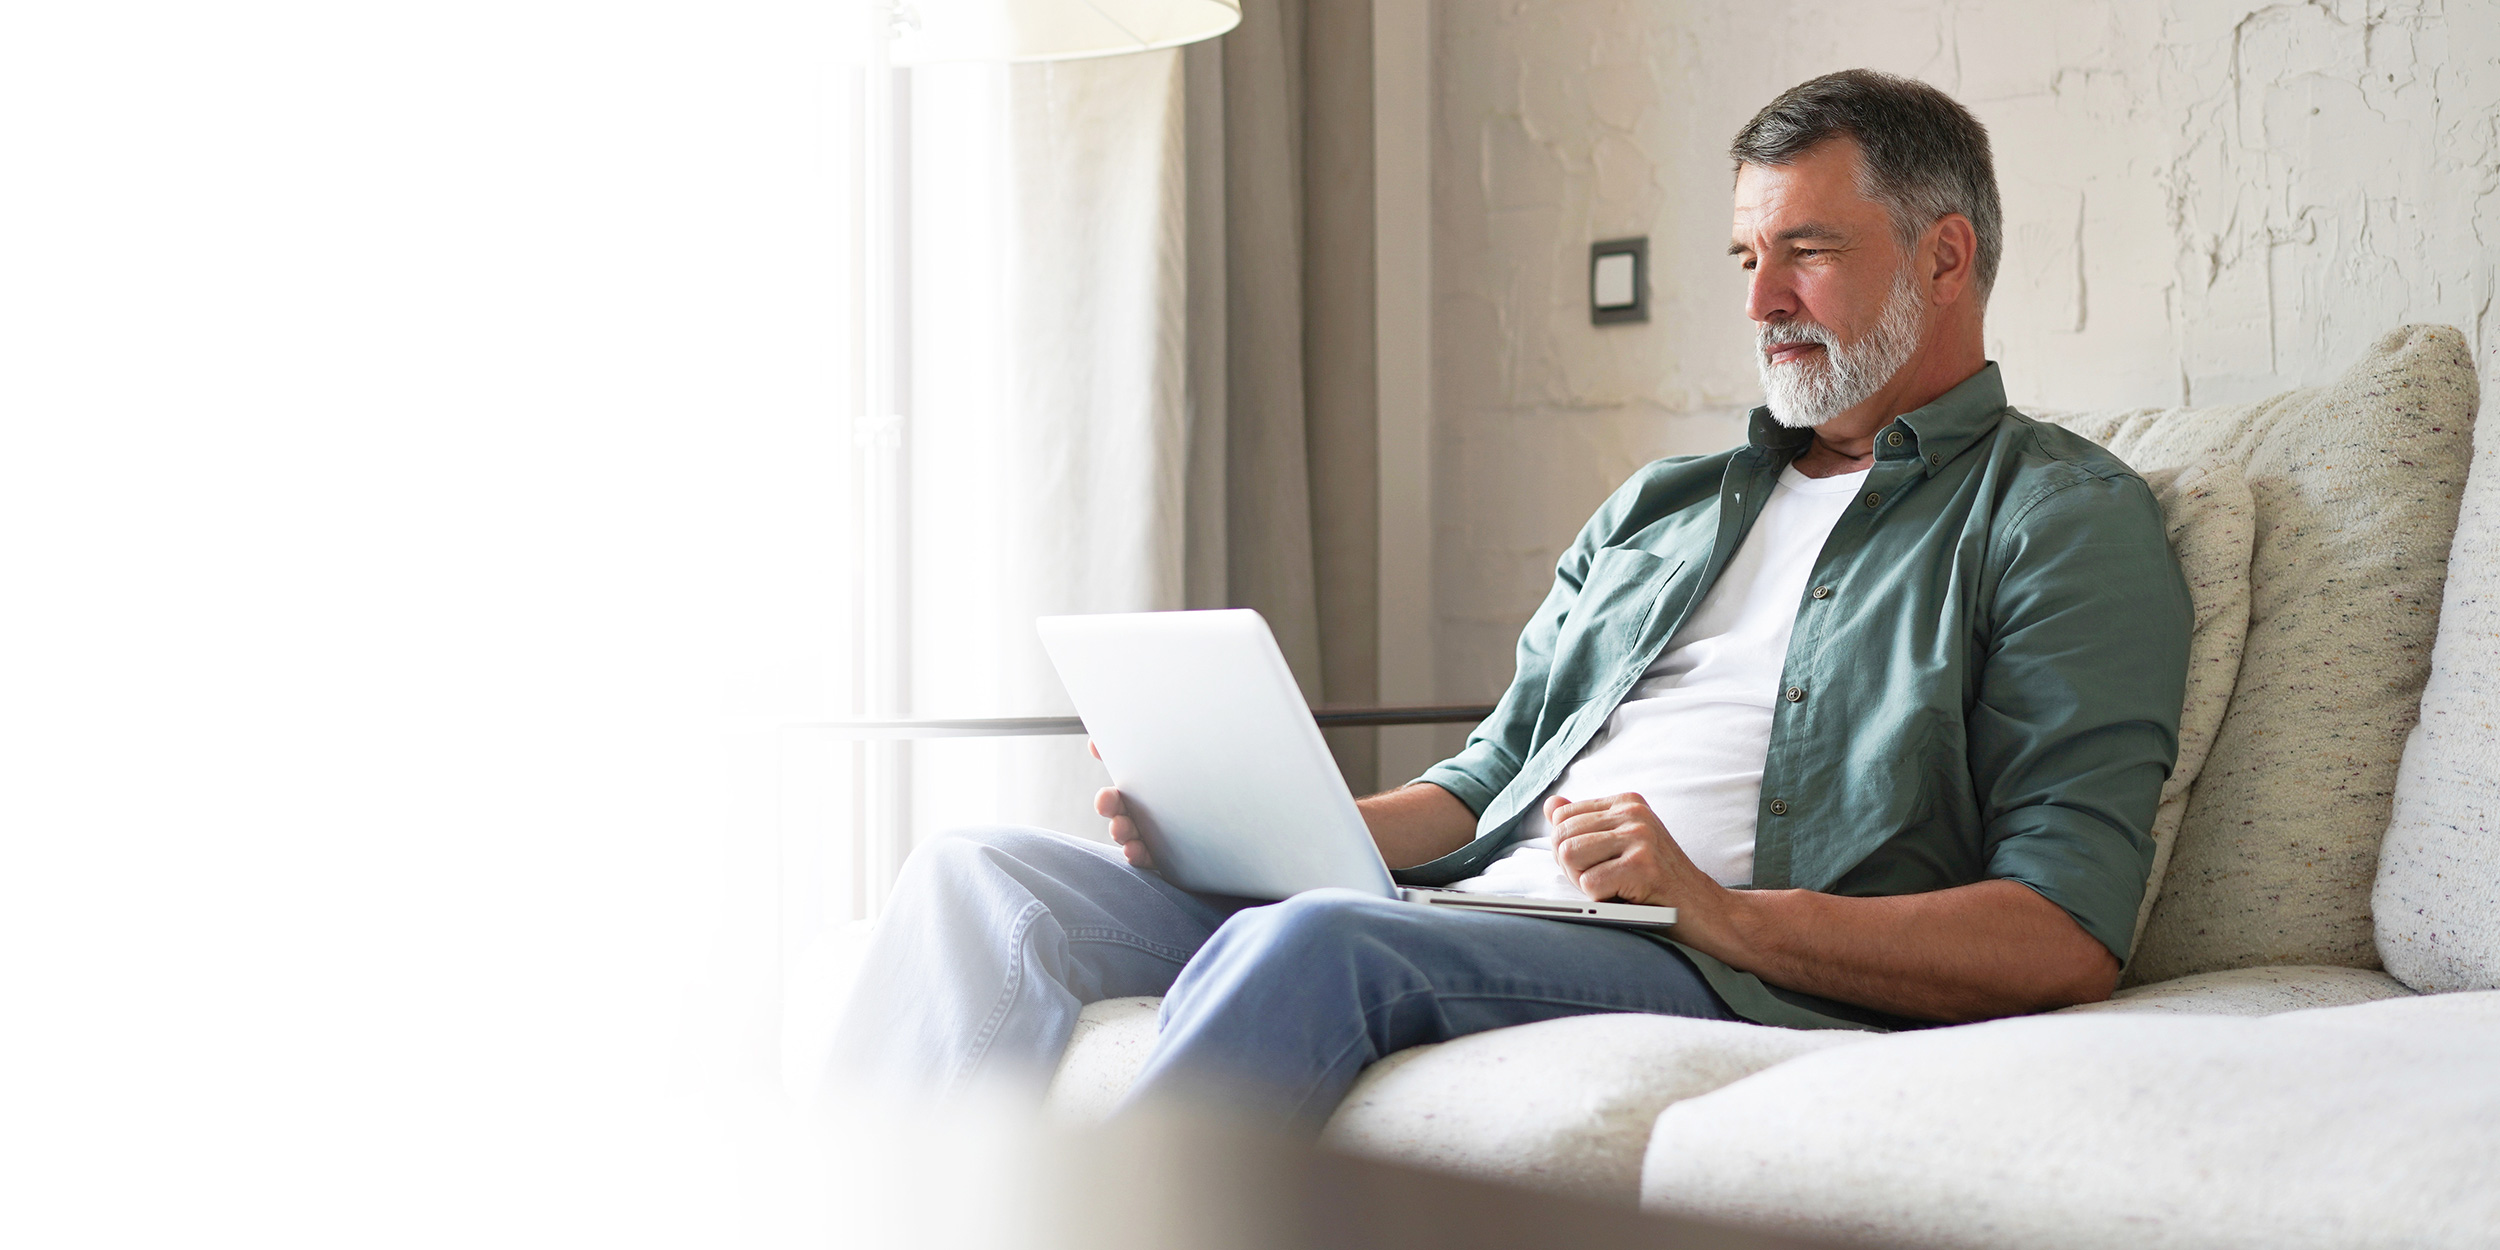 Reclining on his couch, a man looks at his laptop. Troutman & Troutman disability lawyers can explain how to apply for Social Security Disability benefits.